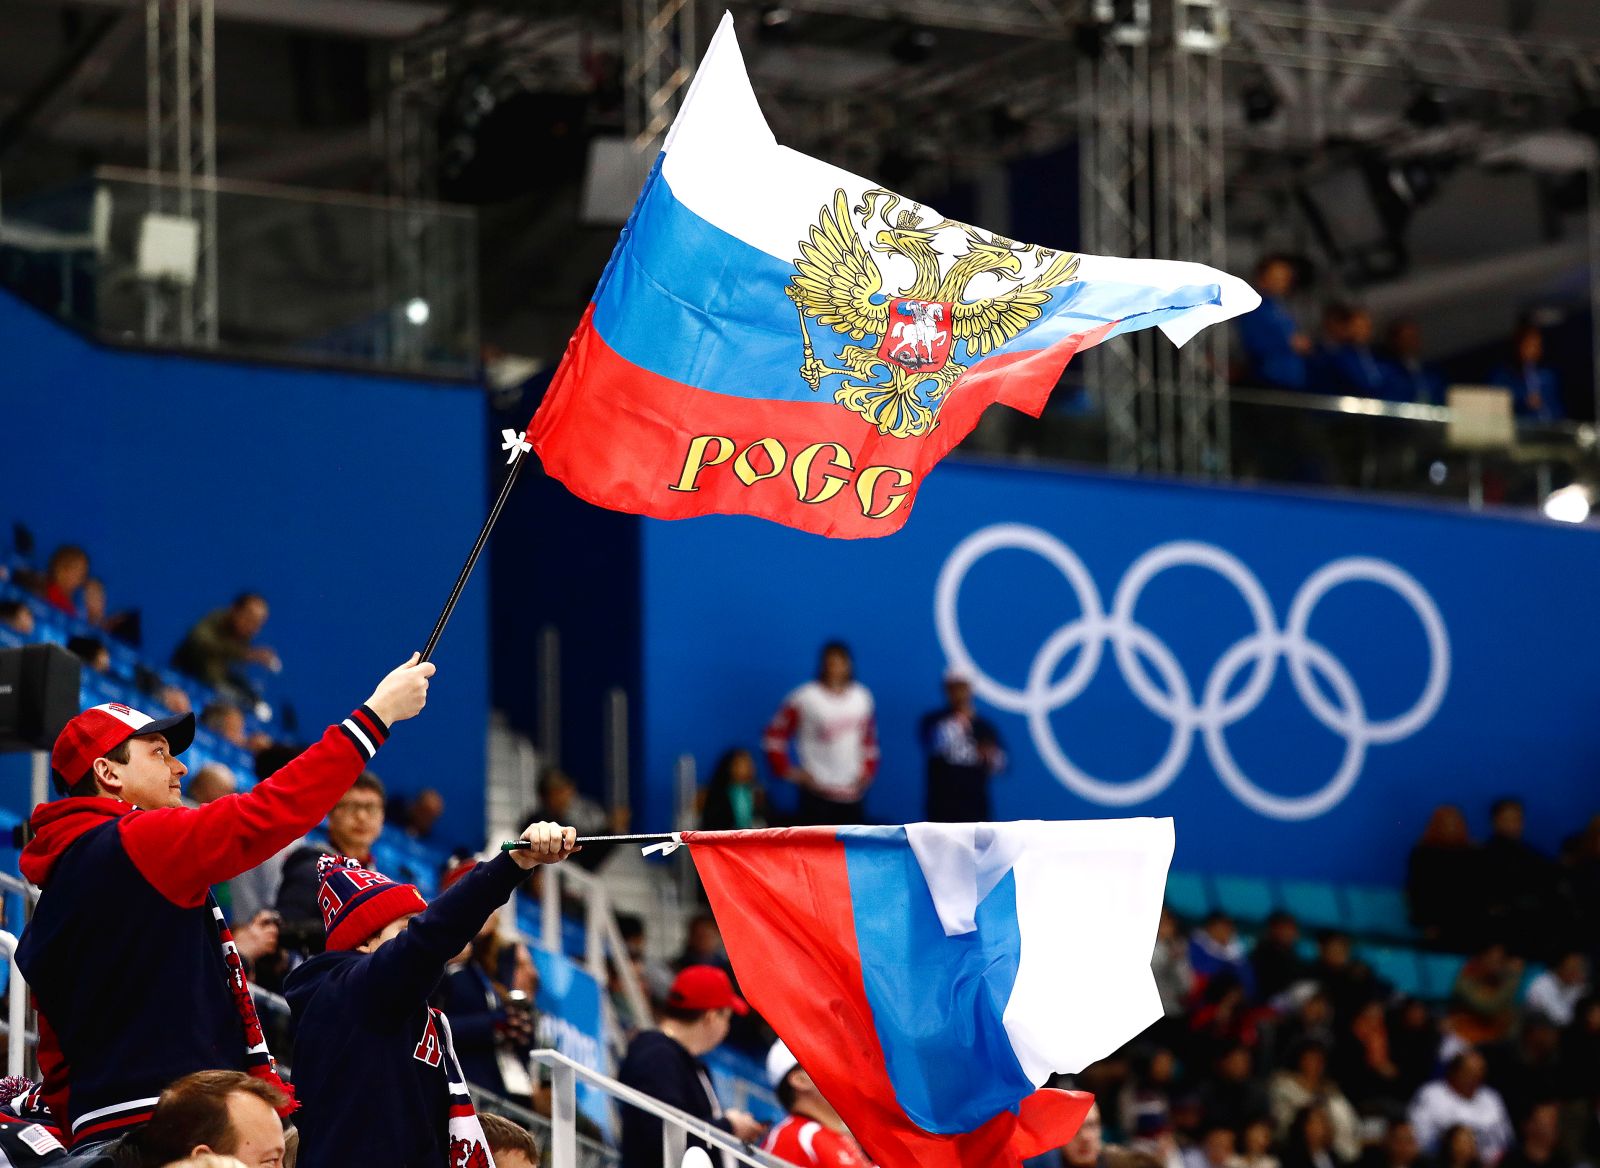 epa09792091 (FILE) - Russian fans wave flags during the men's preliminary round ice hockey match between Russia and the USA inside the Gangneung Hockey Centre at the PyeongChang Winter Olympic Games 2018 in Gangneung, South Korea, 17 February 2018 (re-issued on 28 February 2022). The International Olympic Committee (IOC) on 28 February 2022 recommended that athletes and officials from Russia and Belarus are banned from all international sports competitions.  EPA/LARRY W. SMITH